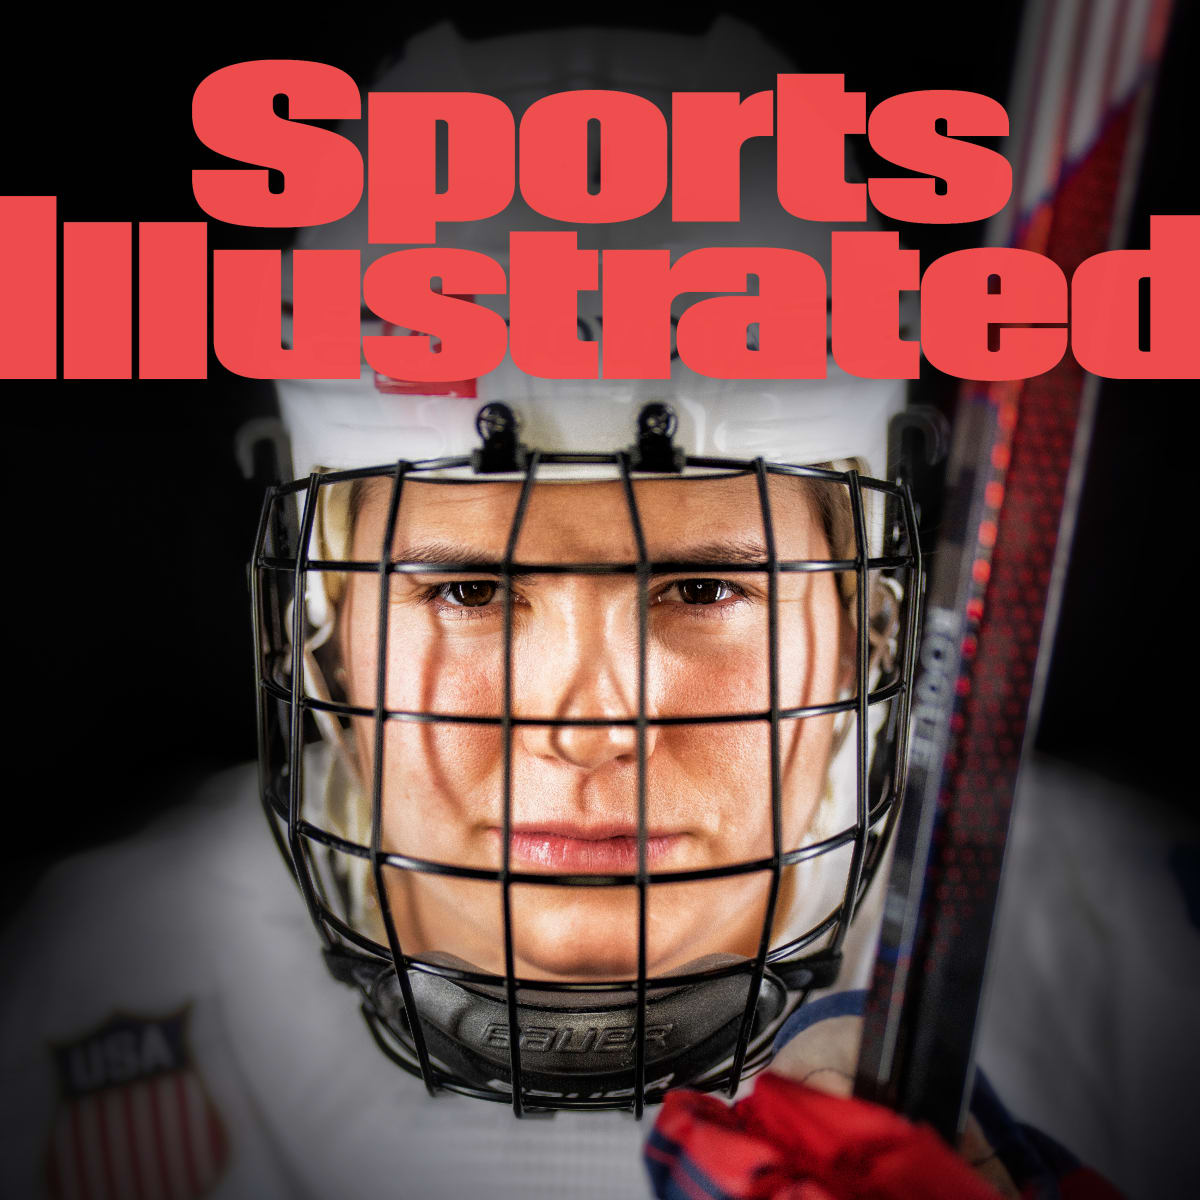 2022 February Sports Illustrated Abby Roque Winter Olympics Beijing  Paralympics